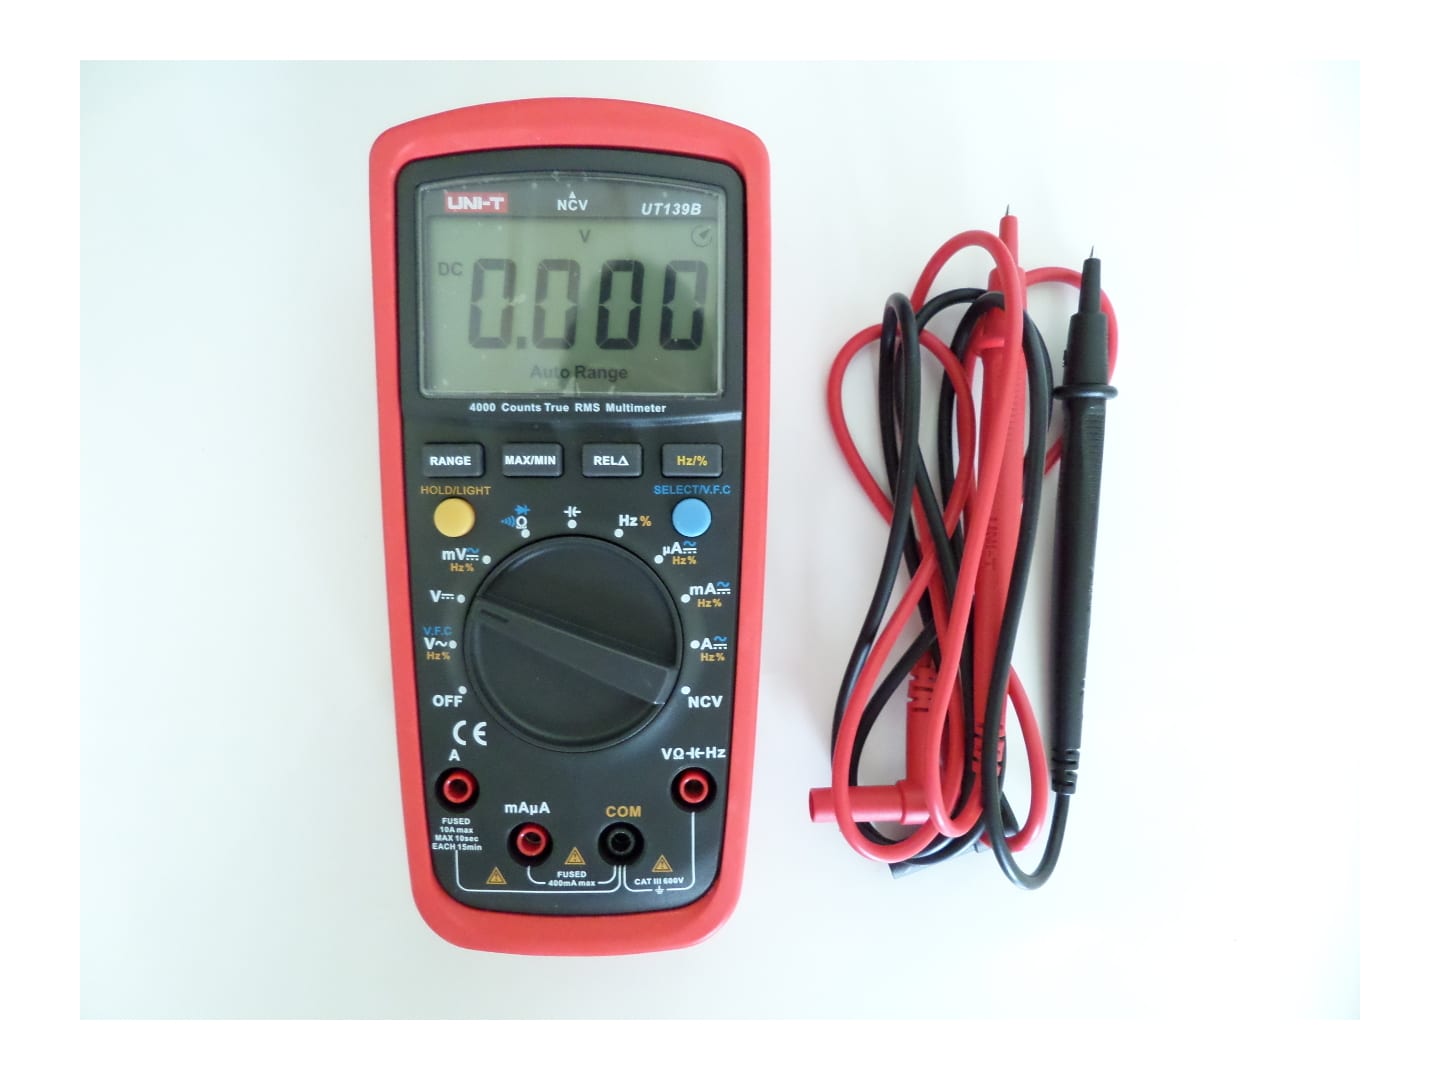 The Uni-T UT139, a True RMS multimeter with 4000 counts.